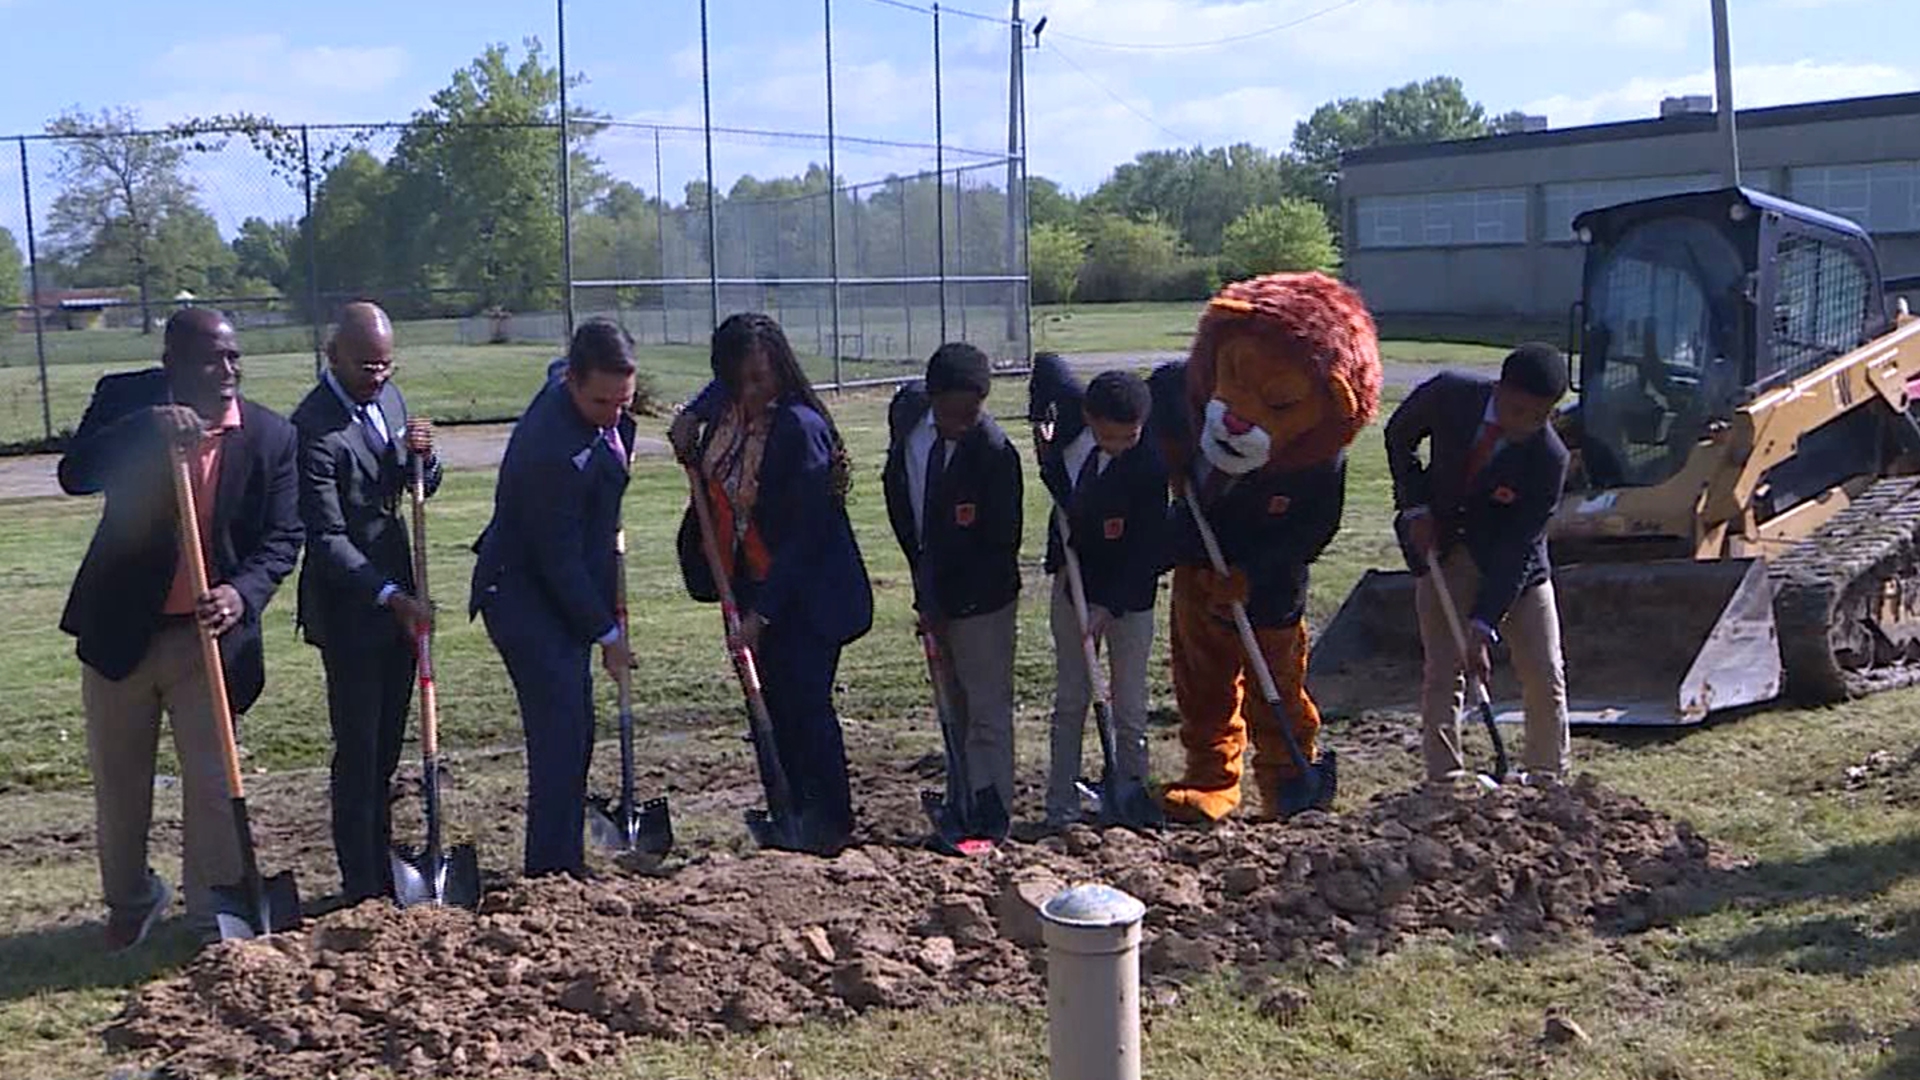 The school will enroll 1,000 students in grades six through 12.